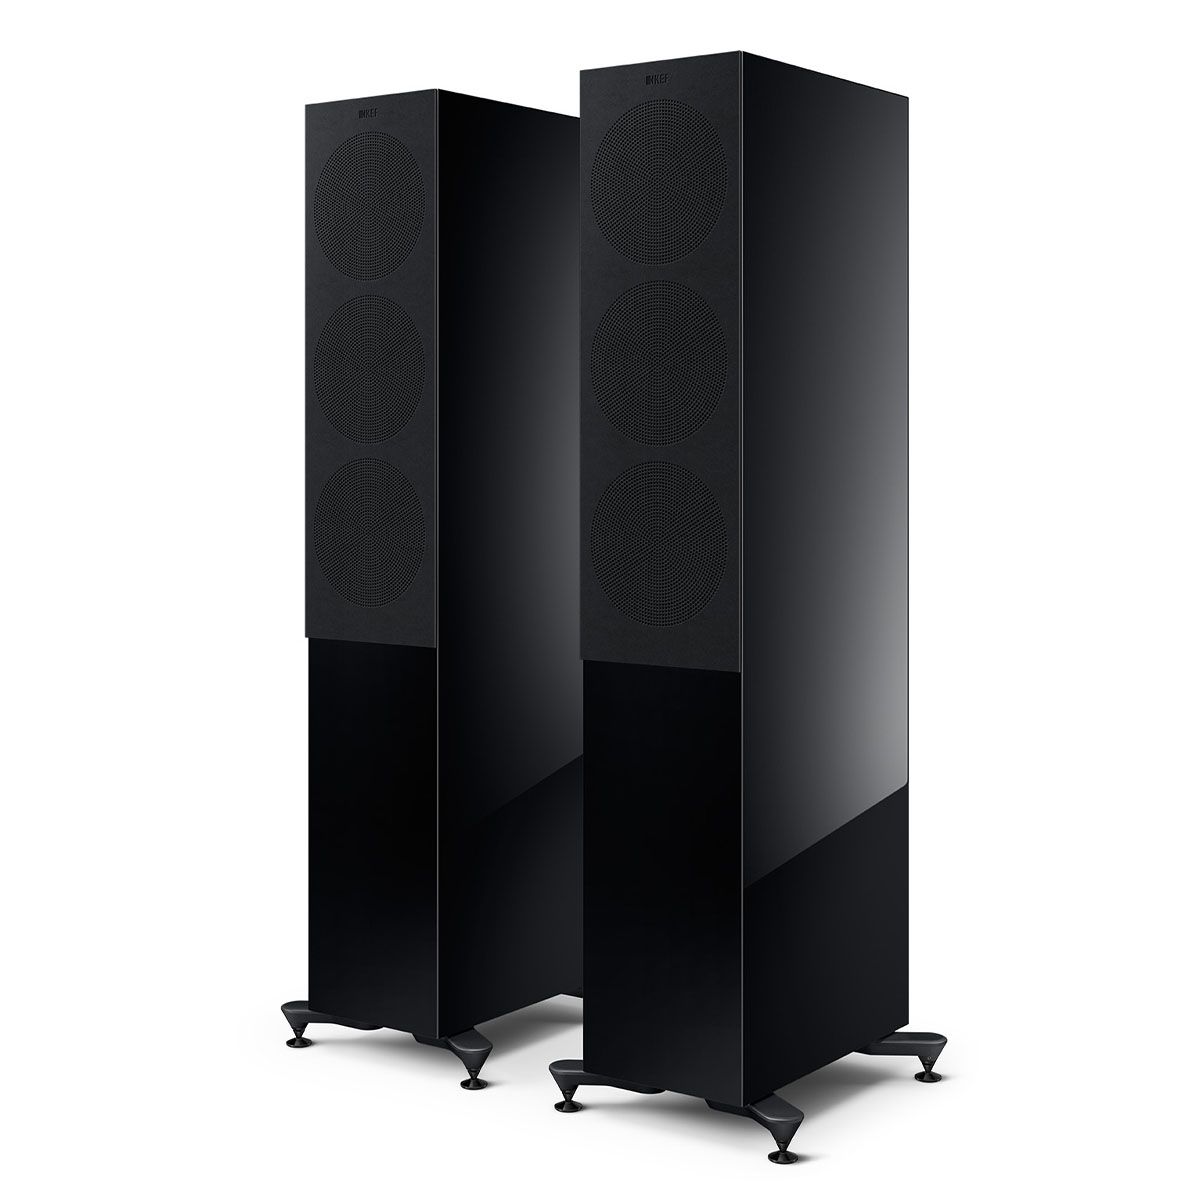 KEF R7 Meta Tower Speaker - black angled front view of pair with grilles